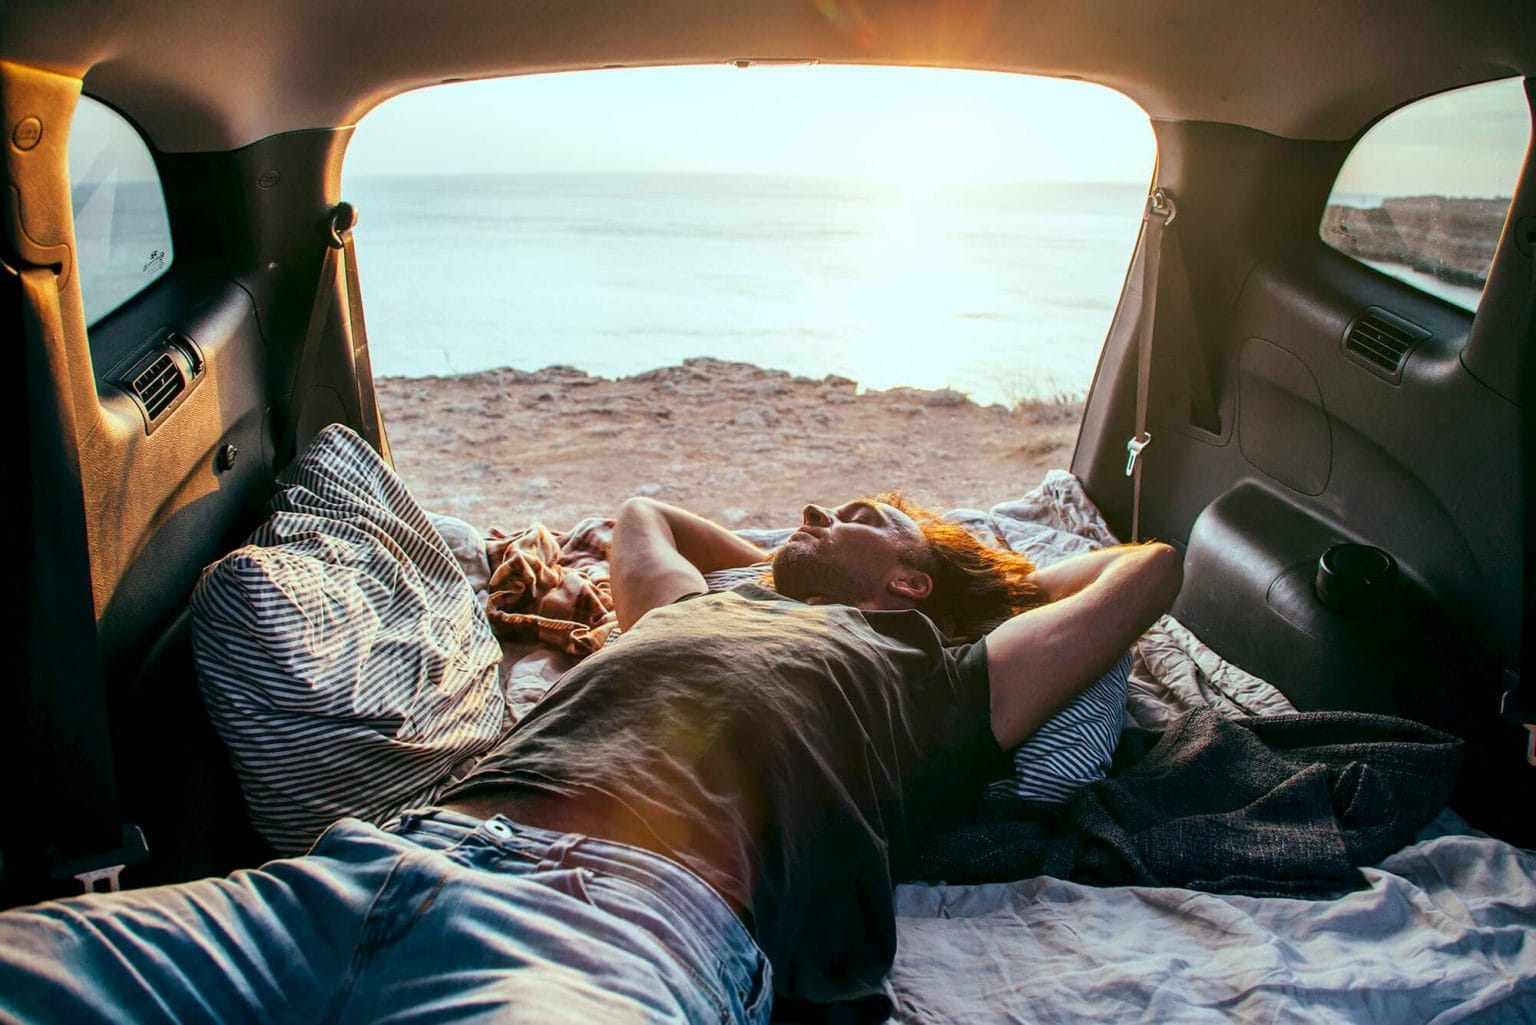 Best places to sleep in your car